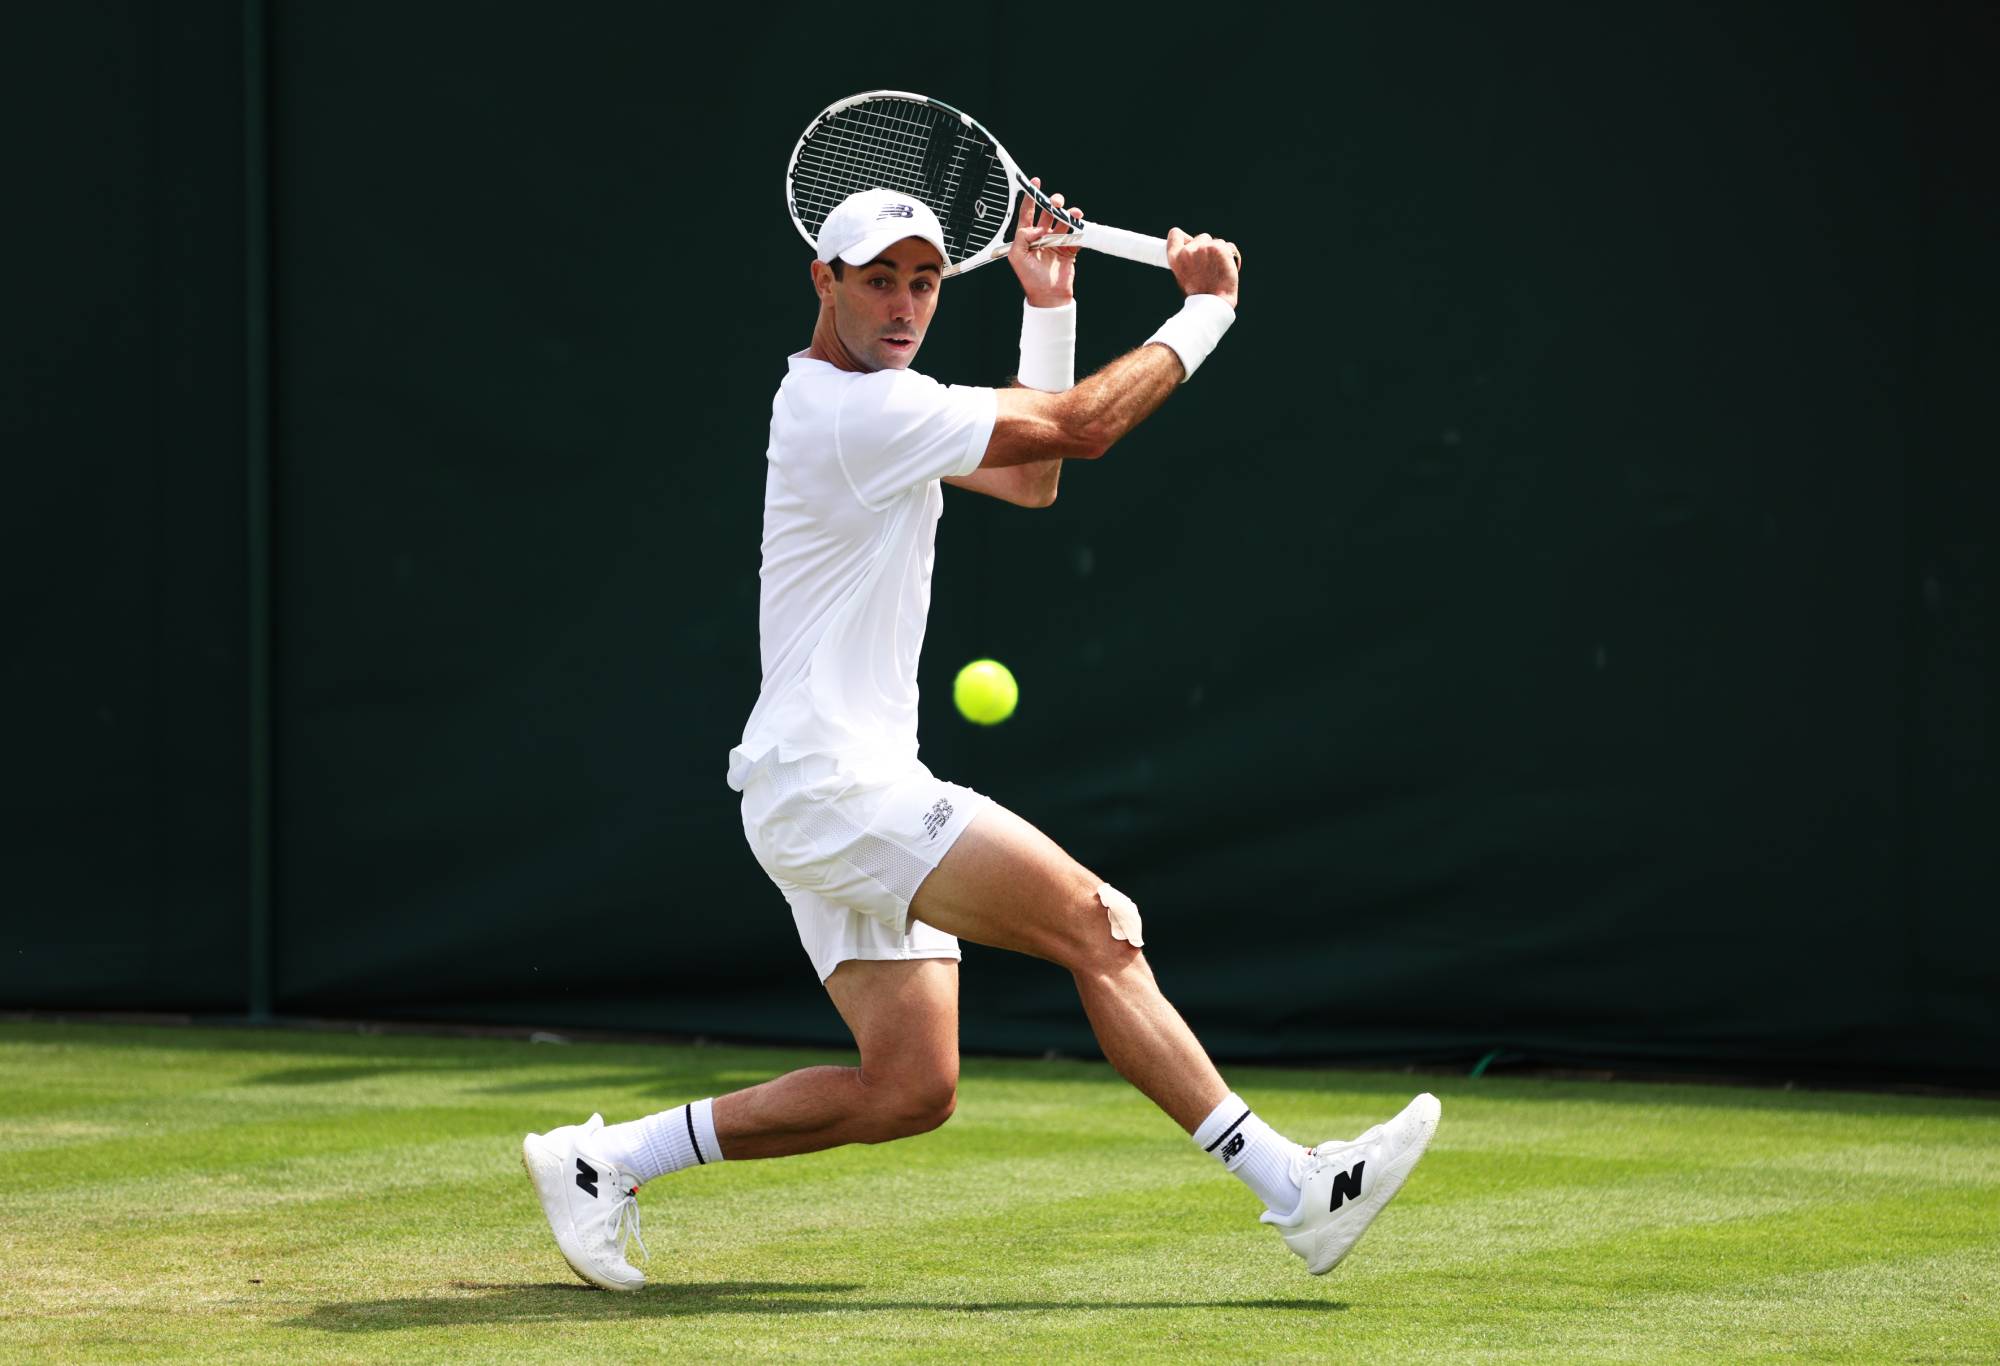 LONDON, ENGLAND - JULY 03: Jordan Thompson of Australia plays a backhand against Brandon Nakashima of United States in the Men's Singles first round match on day one of The Championships Wimbledon 2023 at All England Lawn Tennis and Croquet Club on July 03, 2023 in London, England. (Photo by Clive Brunskill/Getty Images)